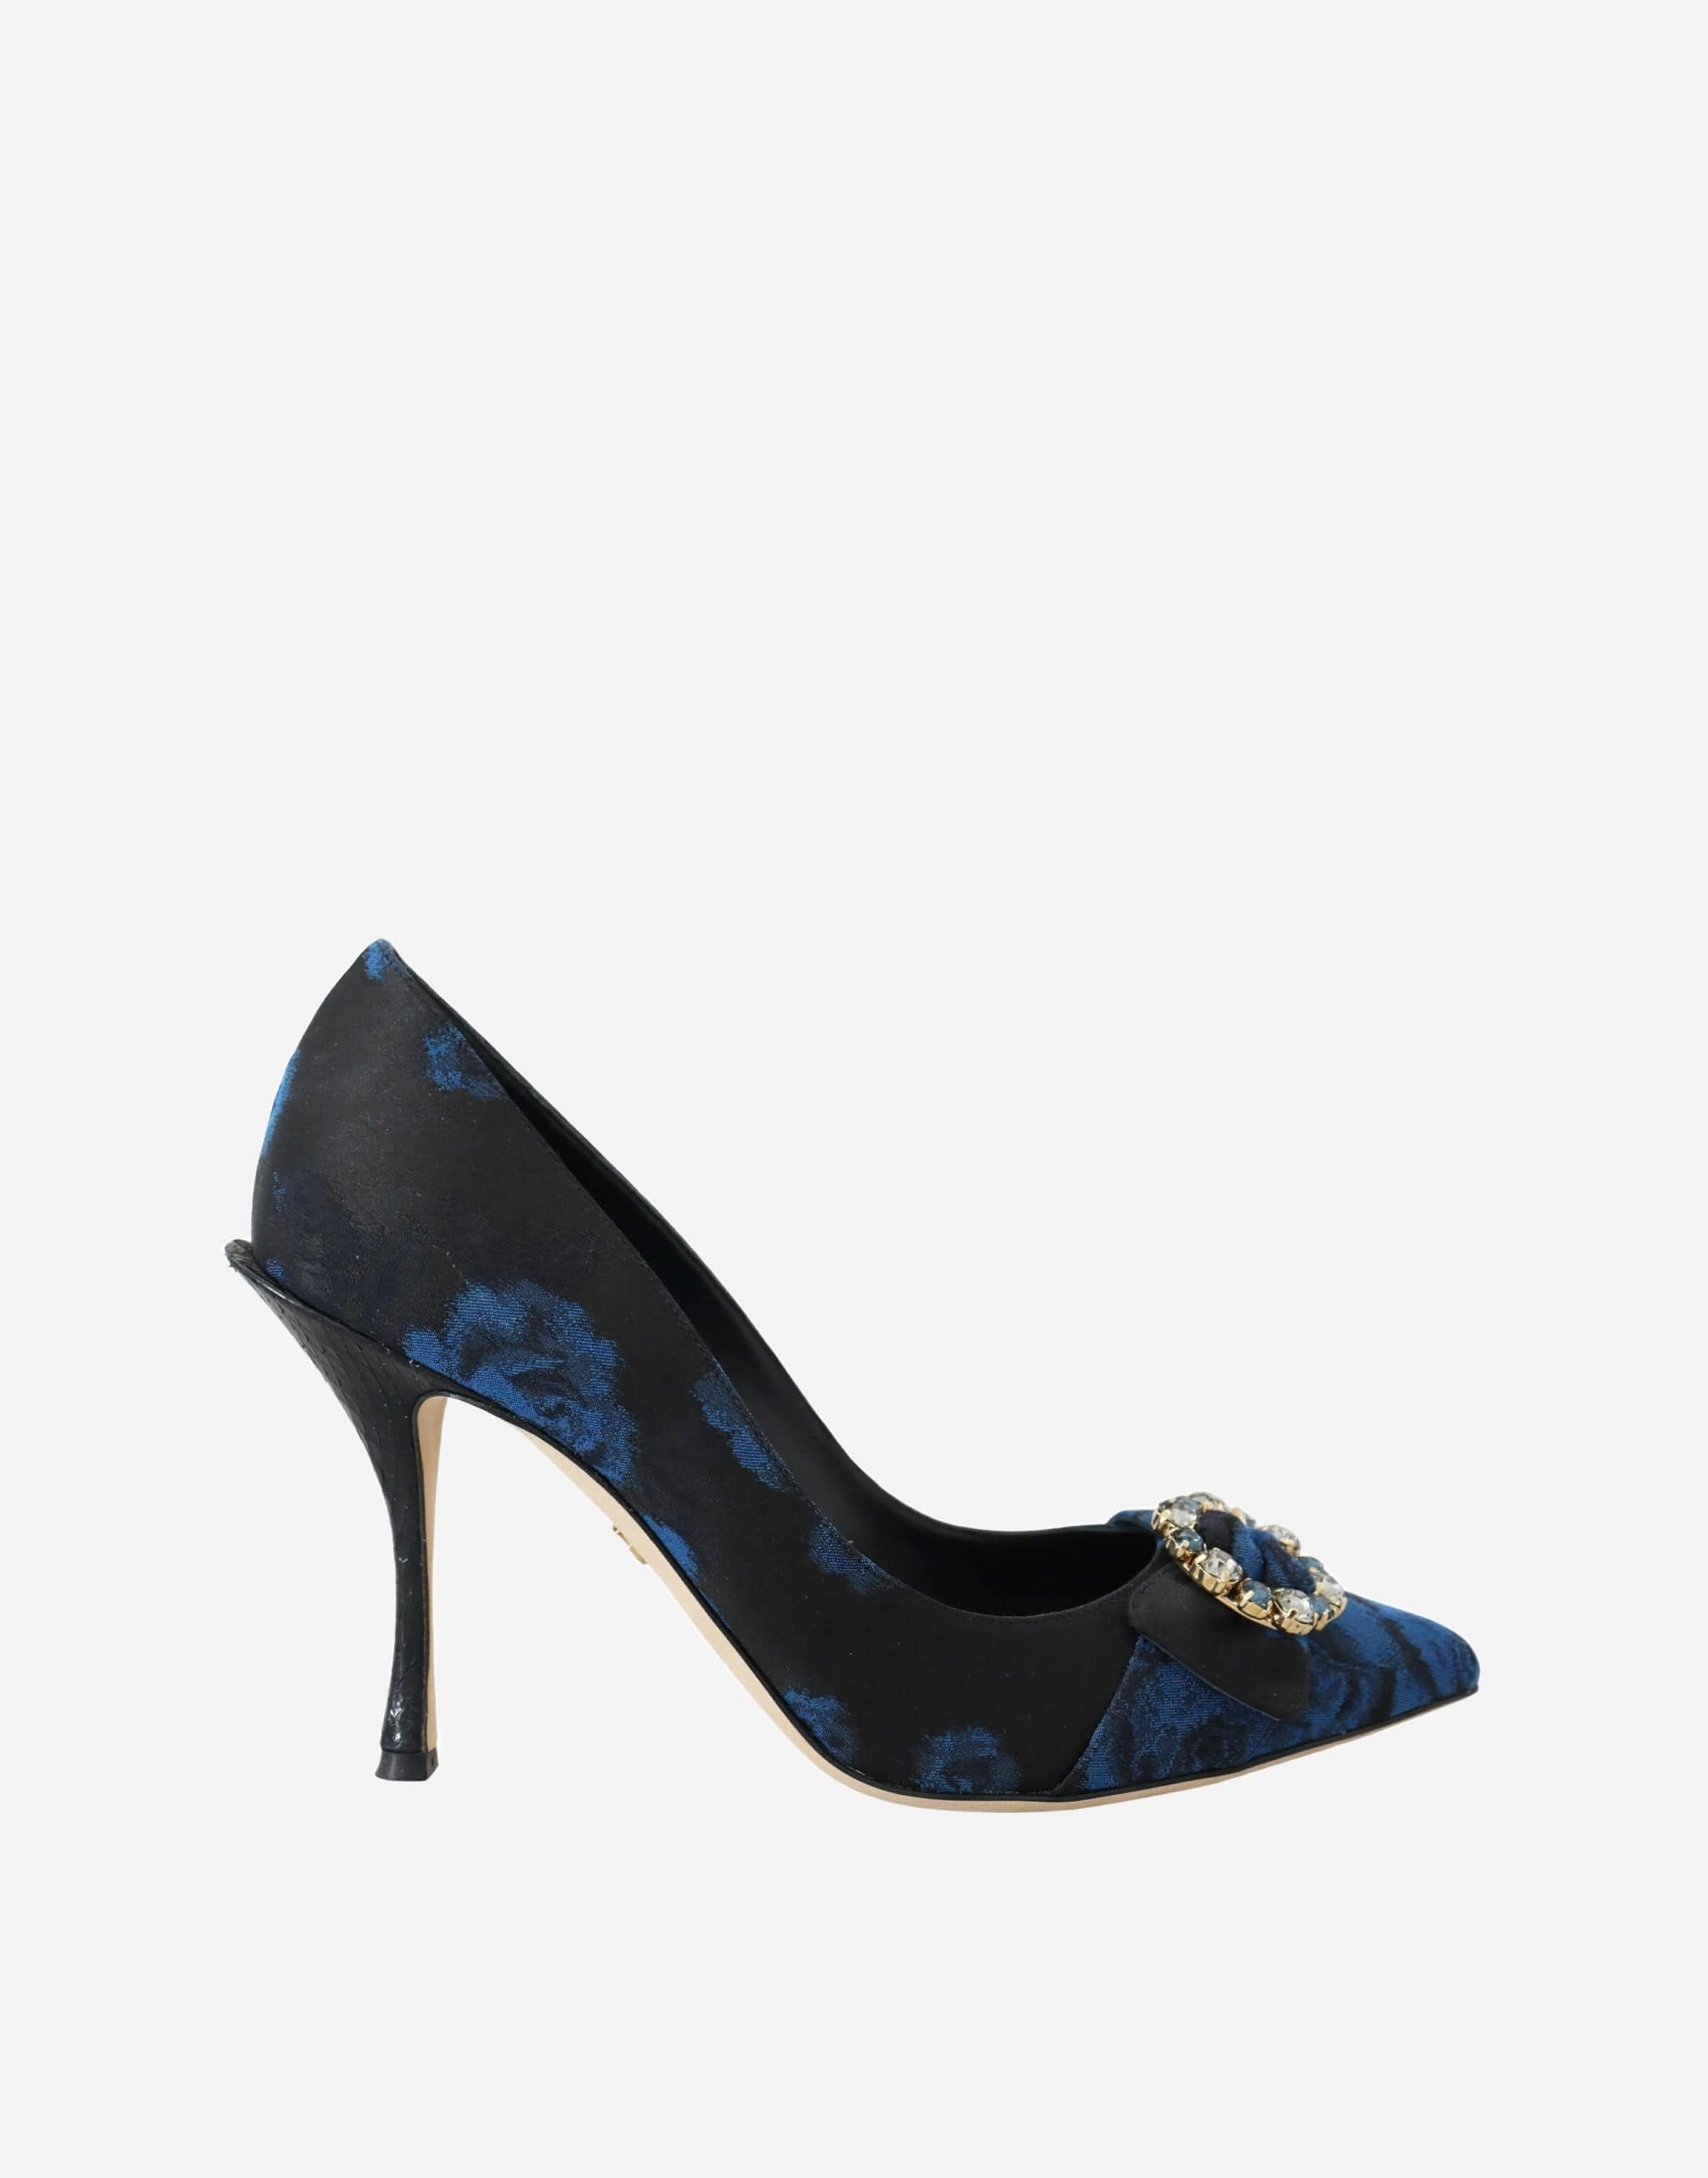 Dolce & Gabbana Pumps With Floral-Print And Embellishment